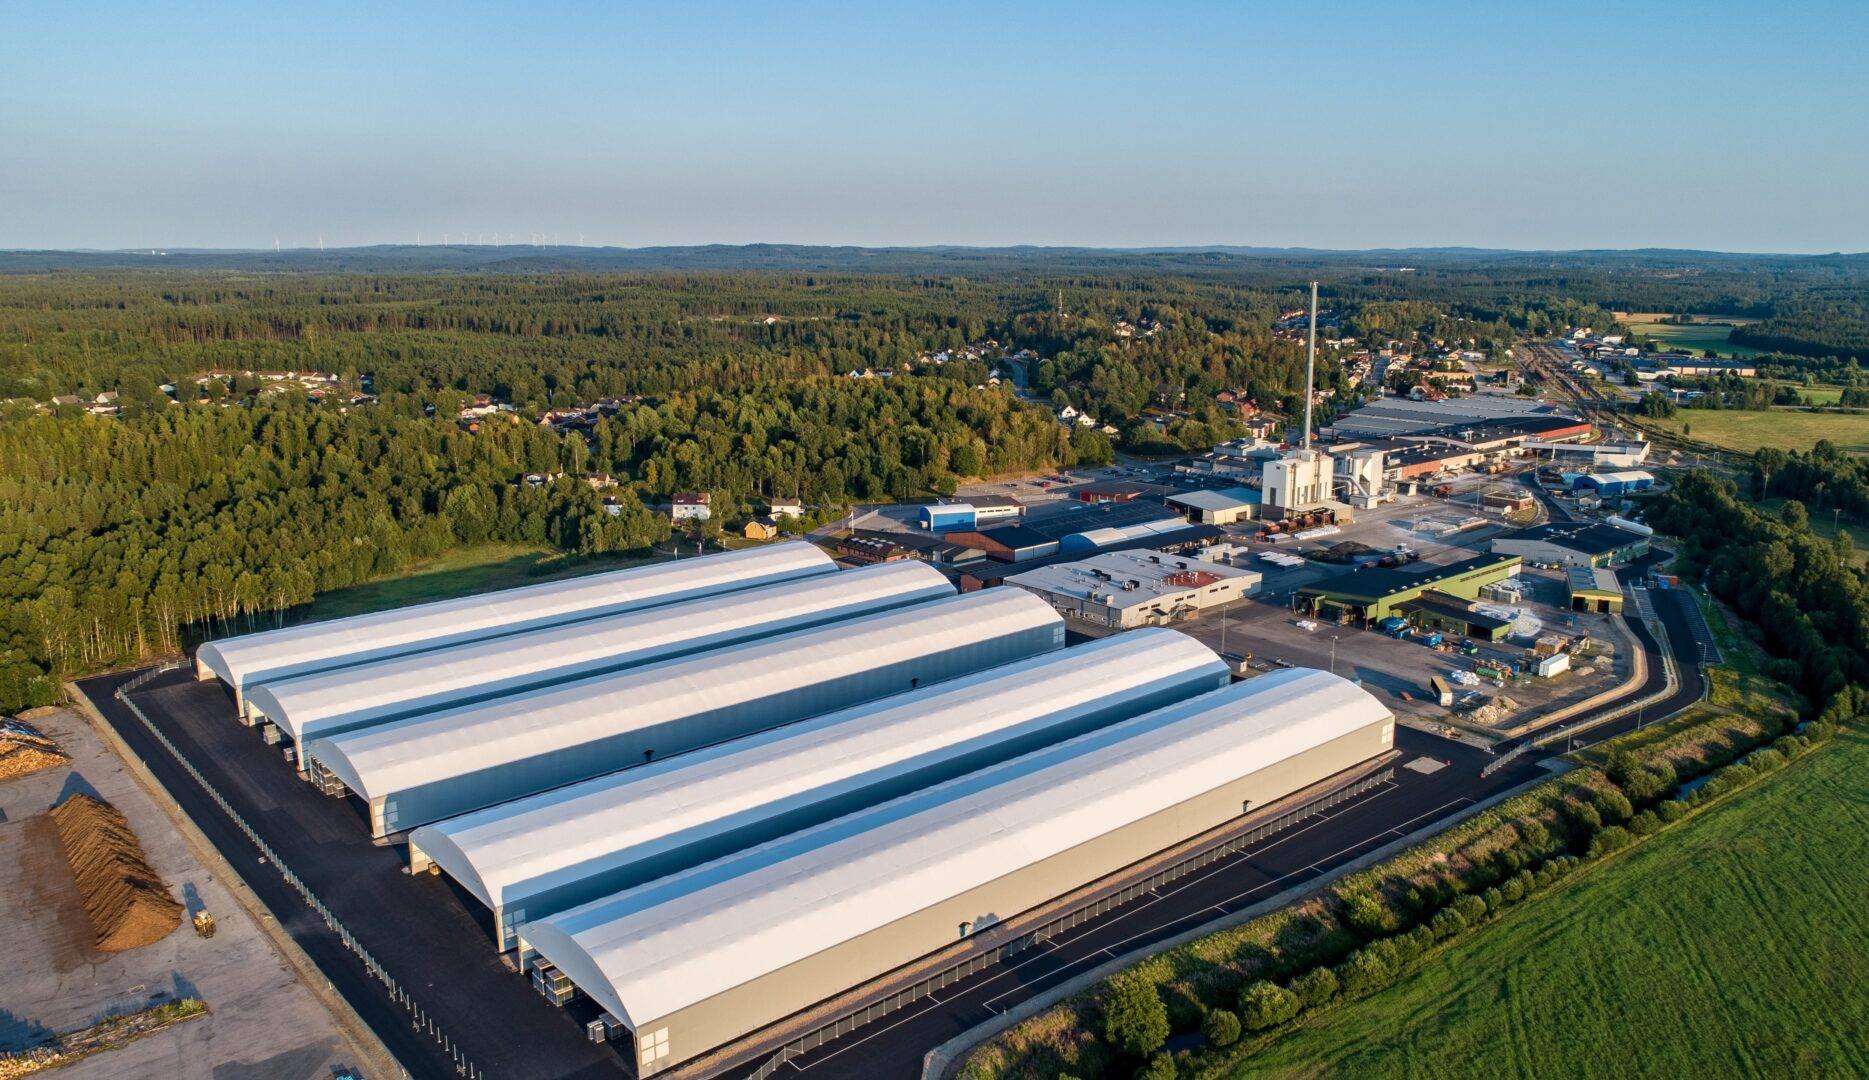 Five large fabric structures at Ardagh Group’s bottles in Limmared.